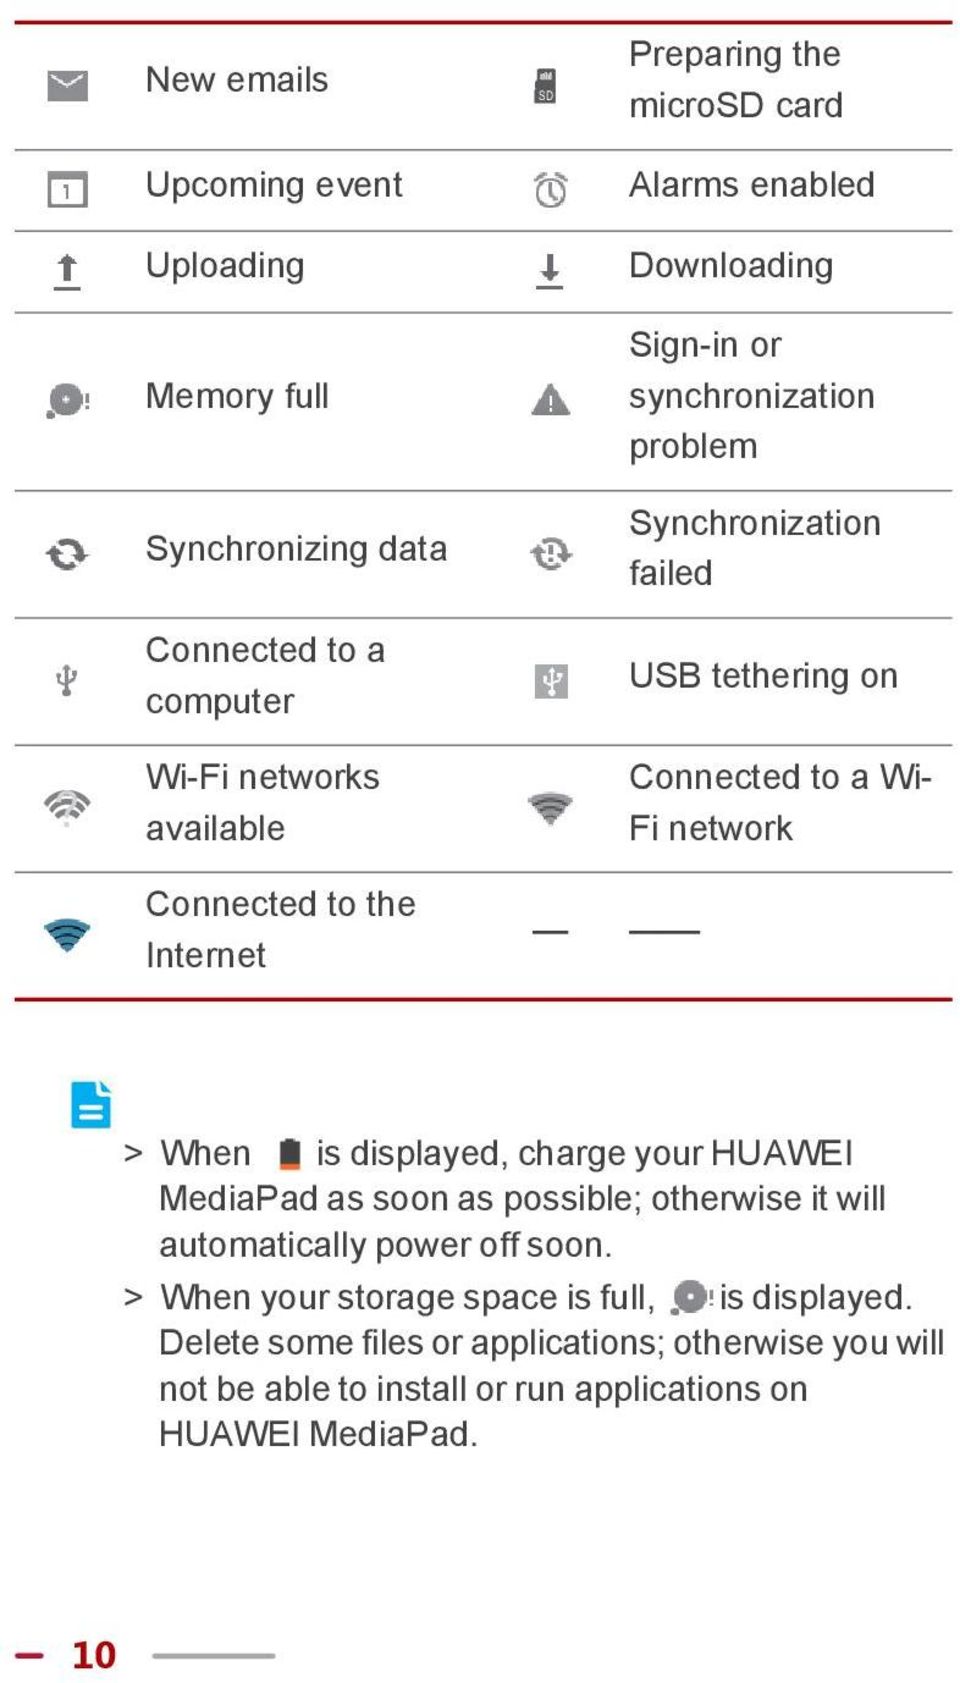 the Internet > When is displayed, charge your HUAWEI MediaPad as soon as possible; otherwise it will automatically power off soon.